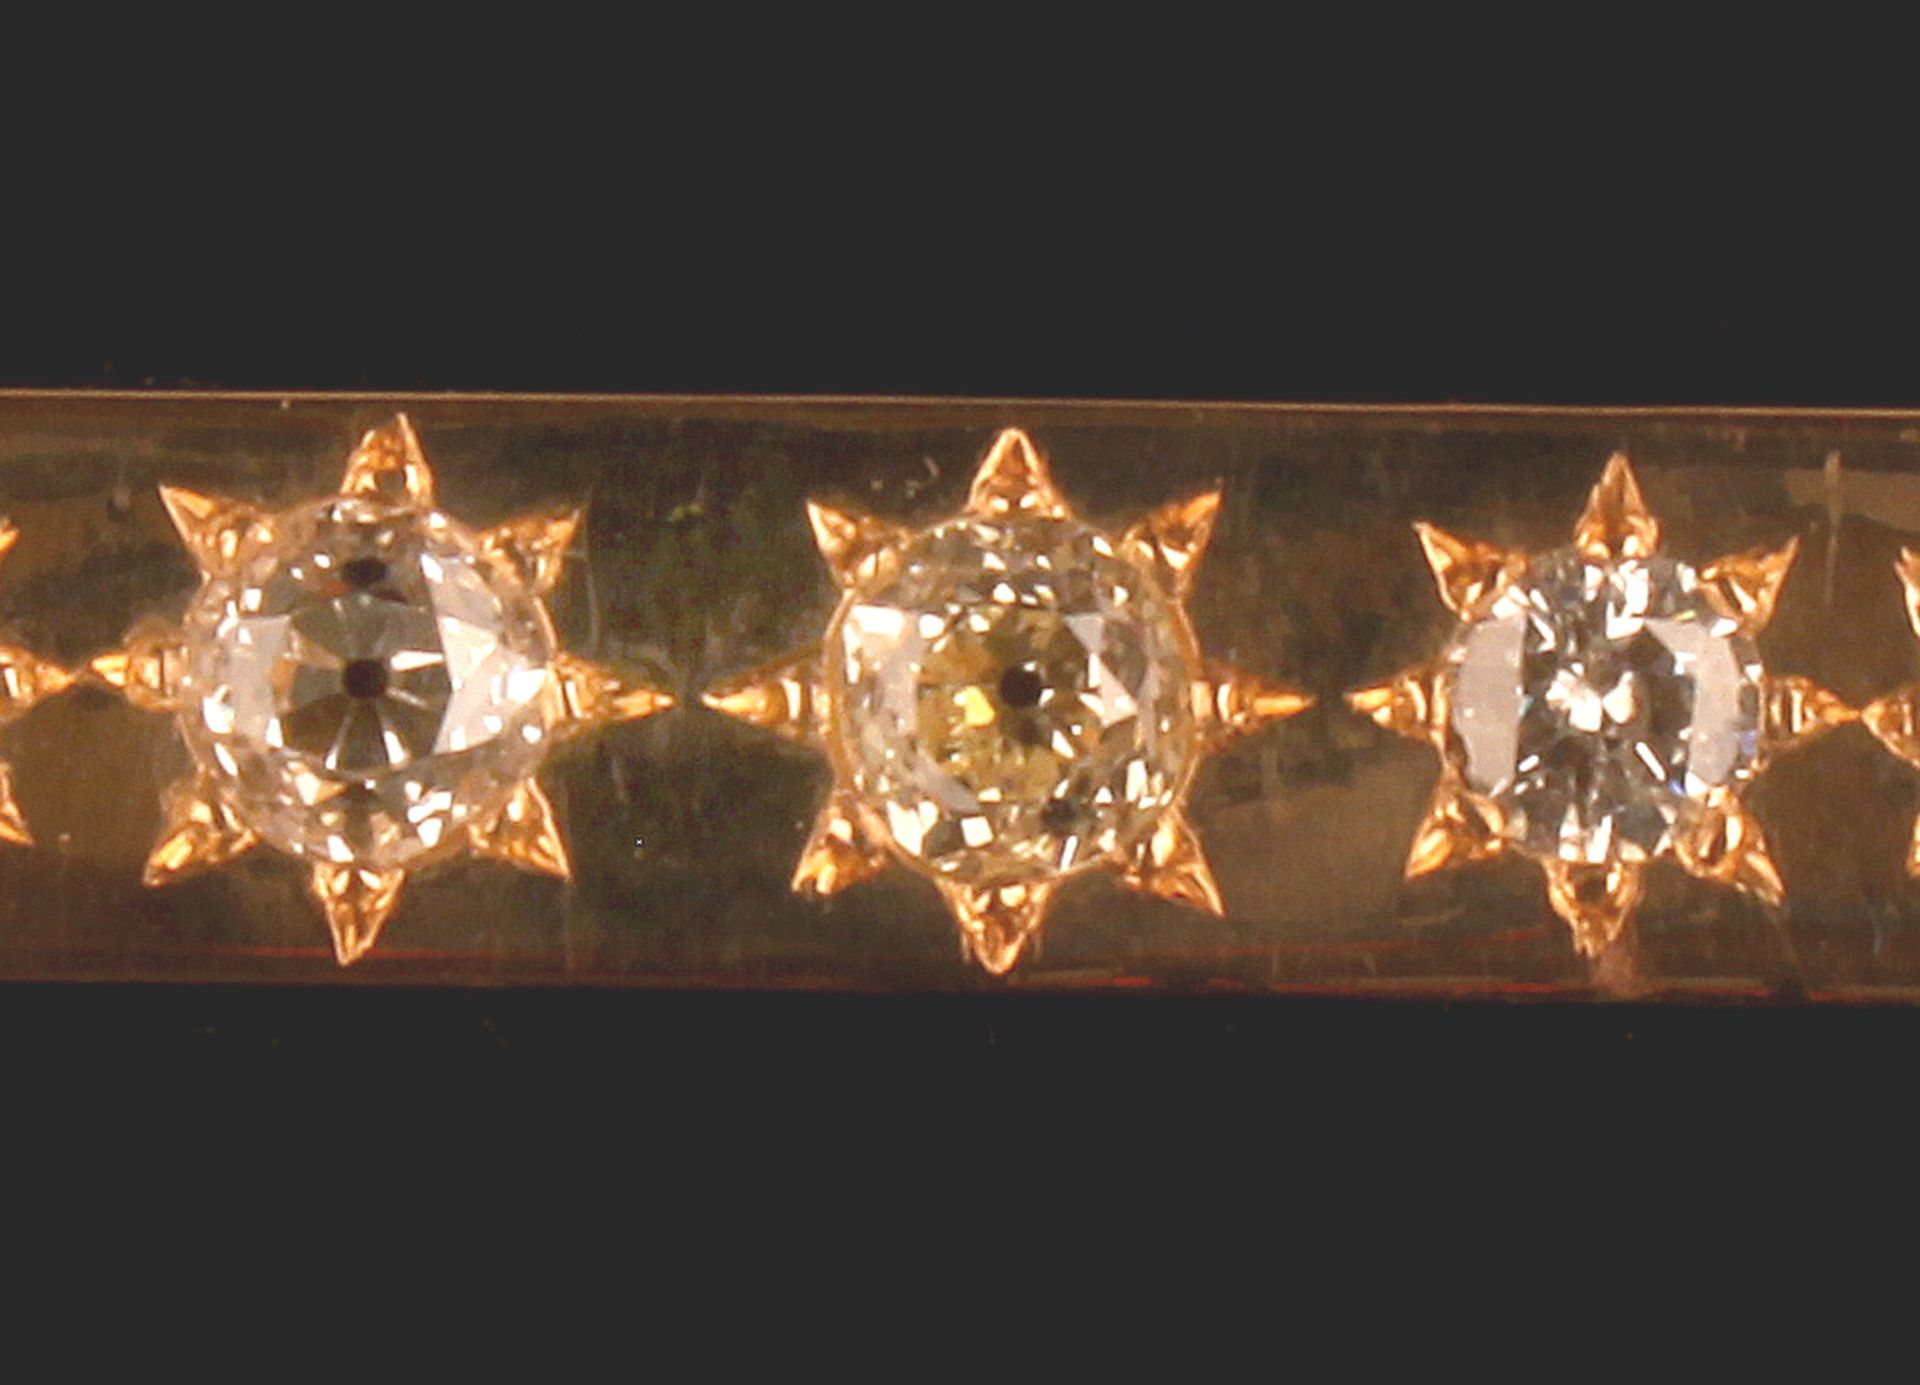 YELLOW GOLD DIAMOND BROOCH - SET WITH OLD MINE CUT DIAMONDS 1.17cts - Image 5 of 6